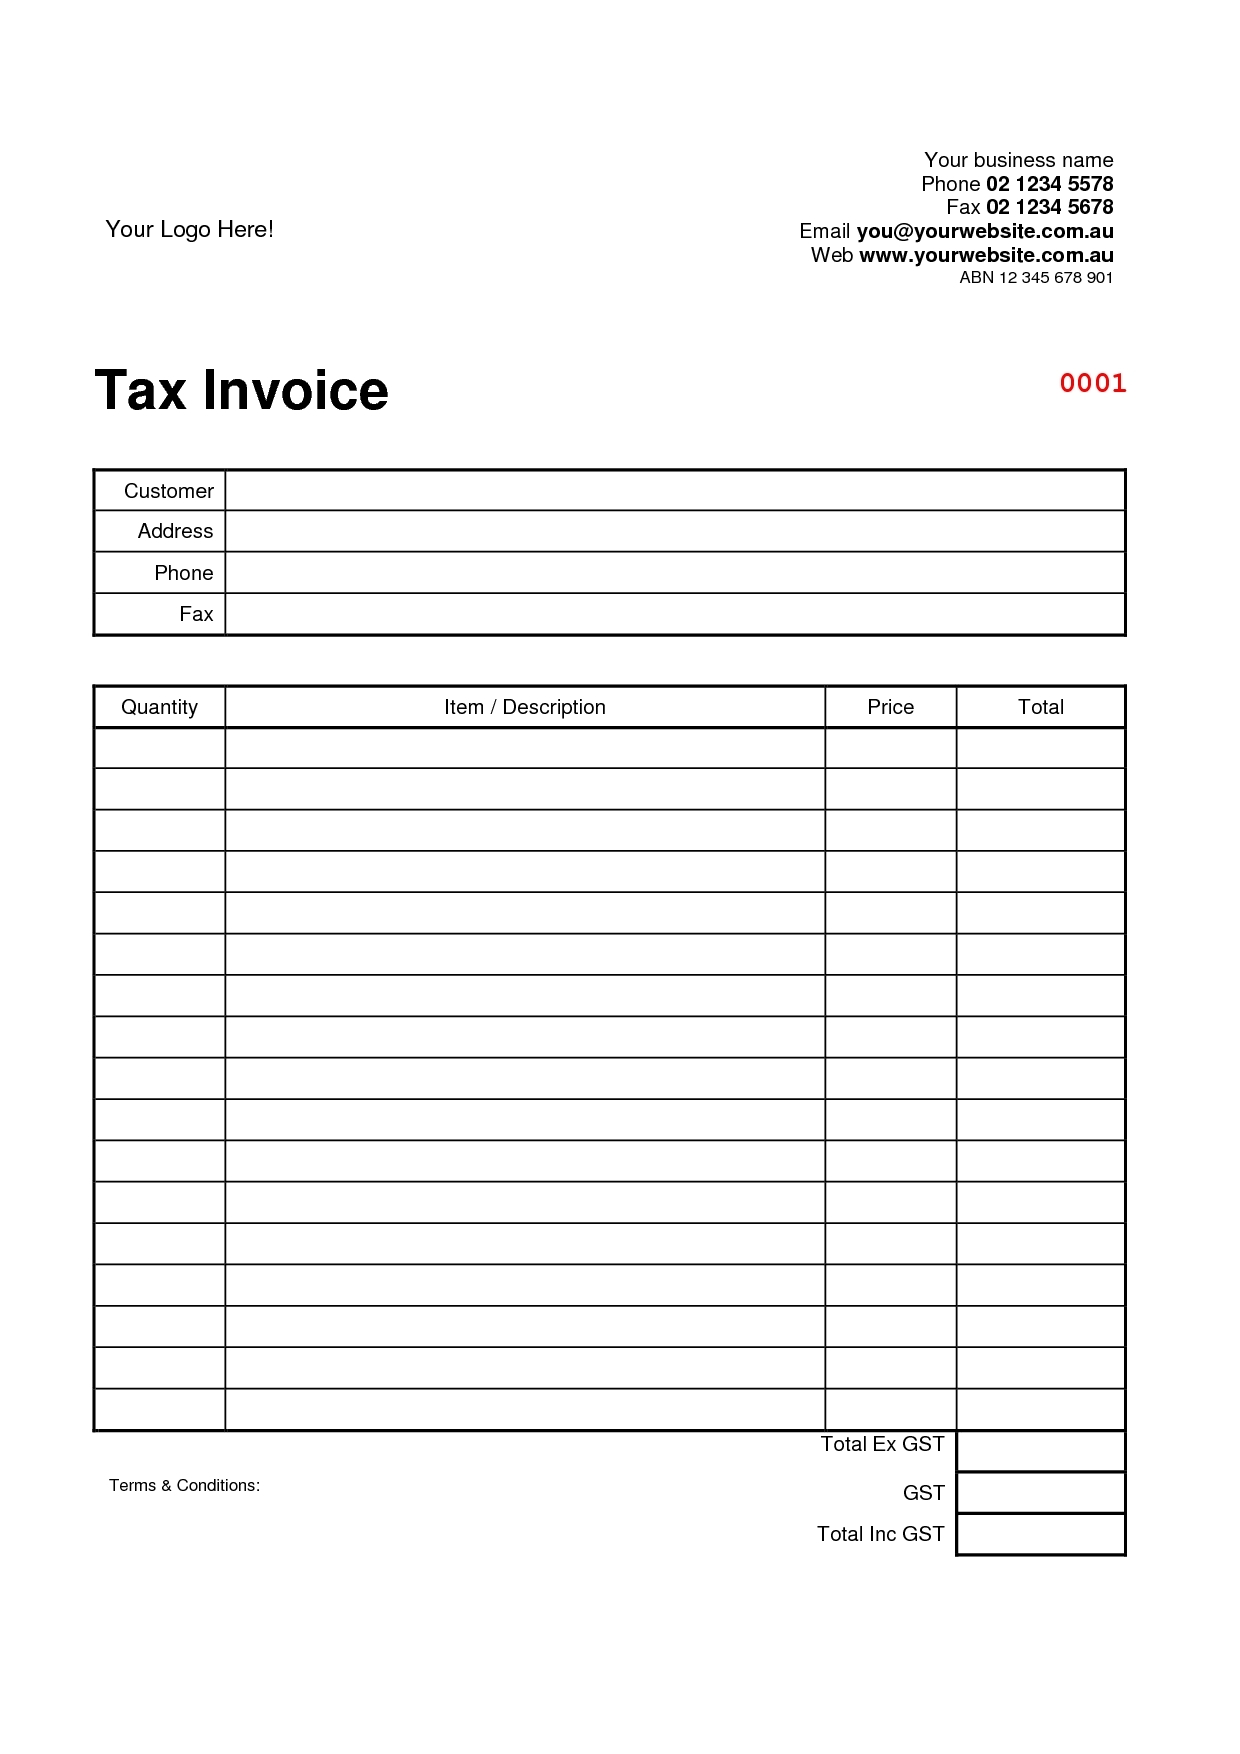 tax invoice template word doc invoice example tax invoice template word doc